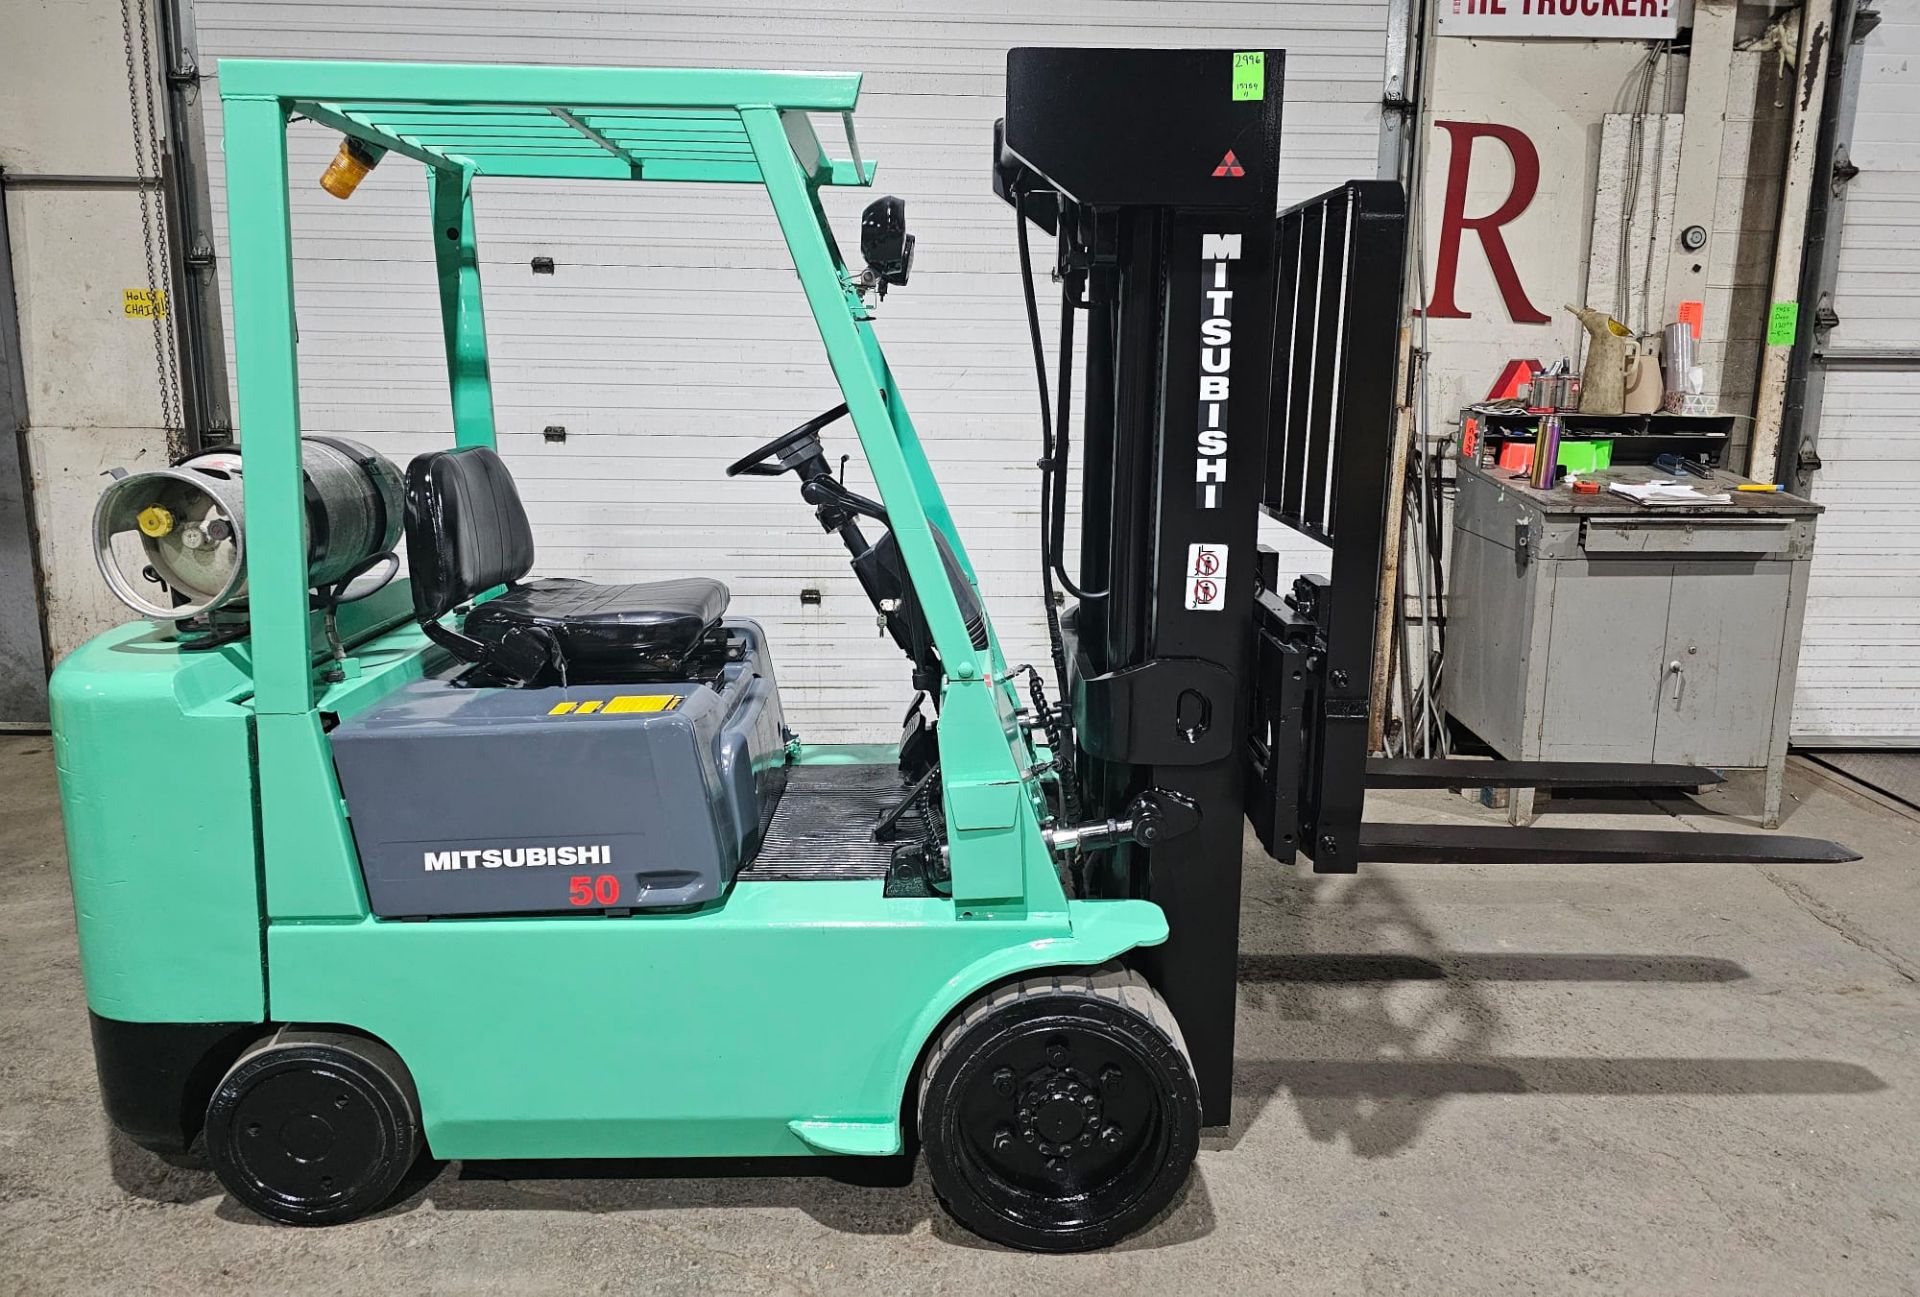 Mitsubishi 5,000lbs Capacity LPG (Propane) Forklift with sideshift 4- STAGE MAST 240" Load Height (